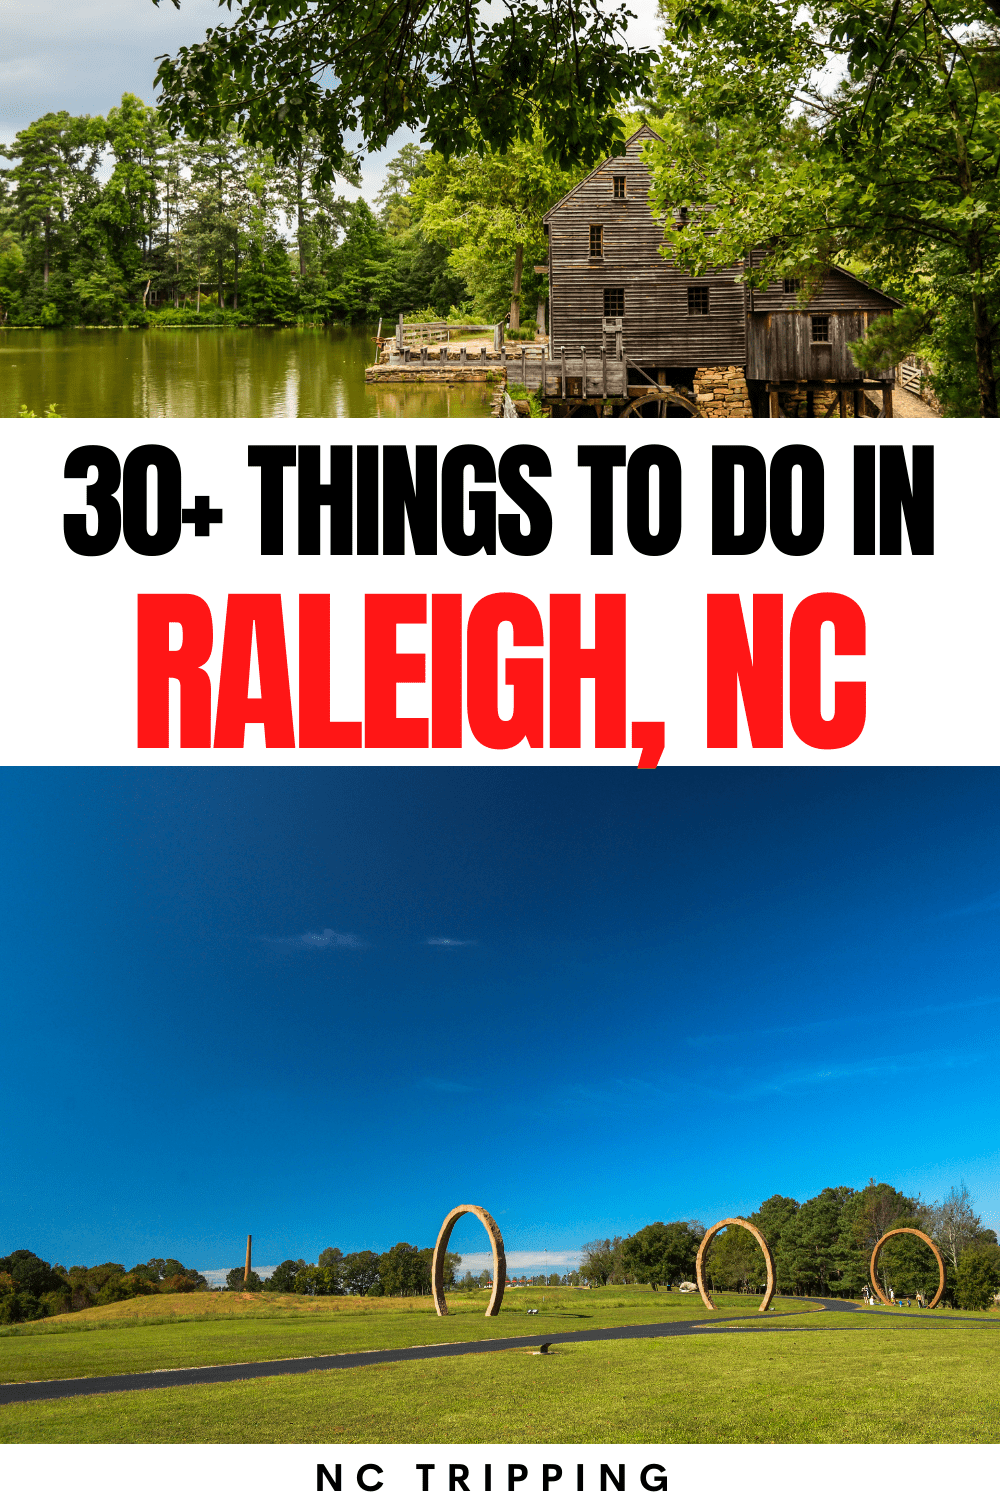 31 AMAZING Things to Do in Raleigh NC (Food + Museums)